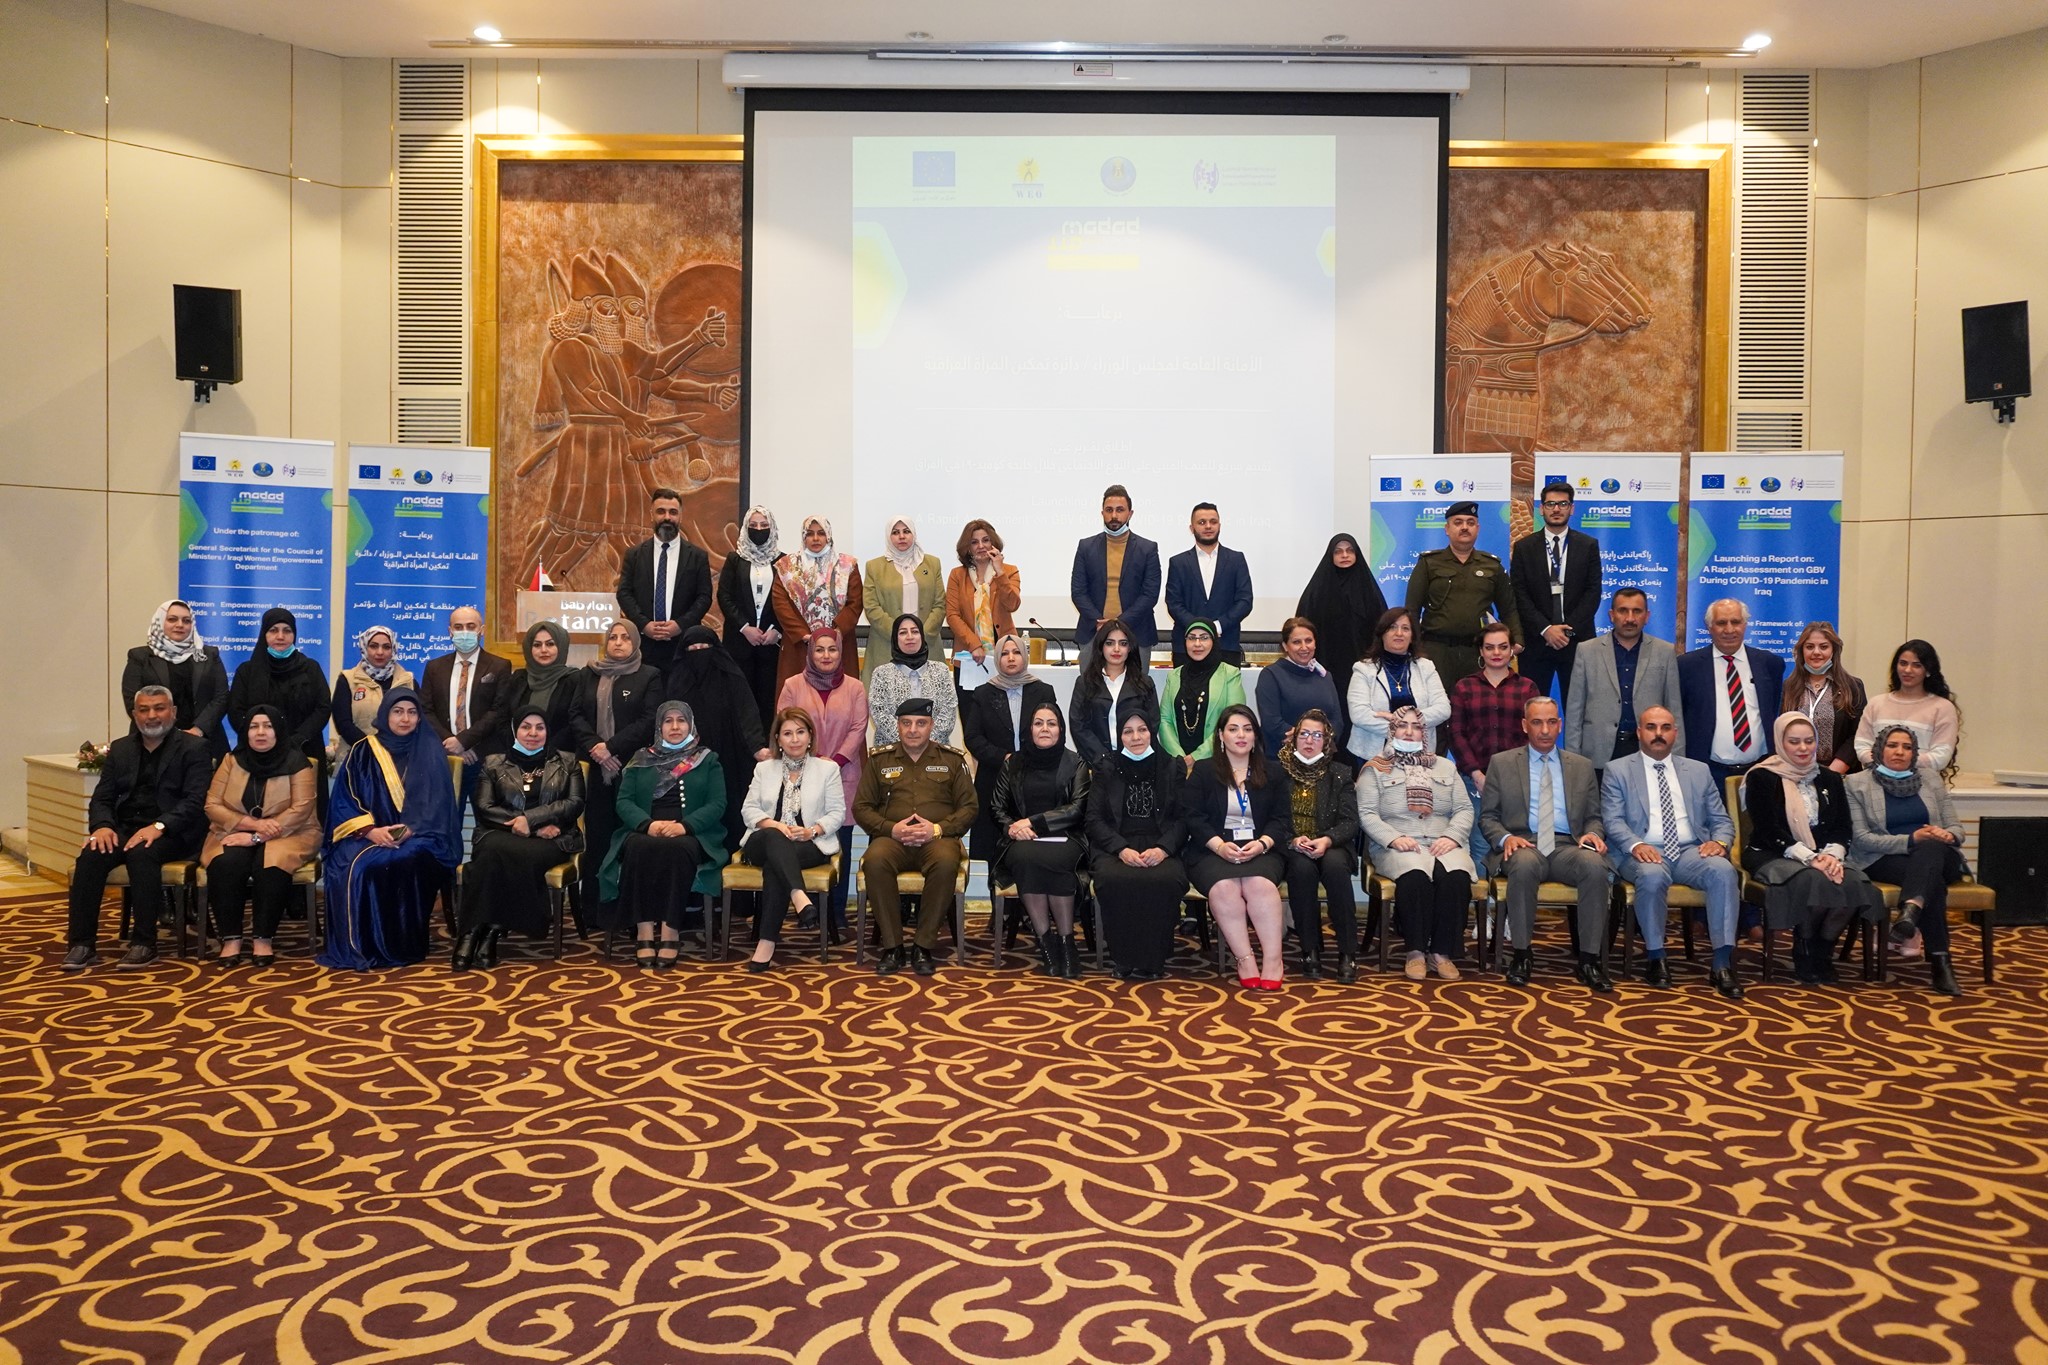 Launching a report on "A Rapid Assessment on GBV During COVID-19 Pandemic in Iraq”